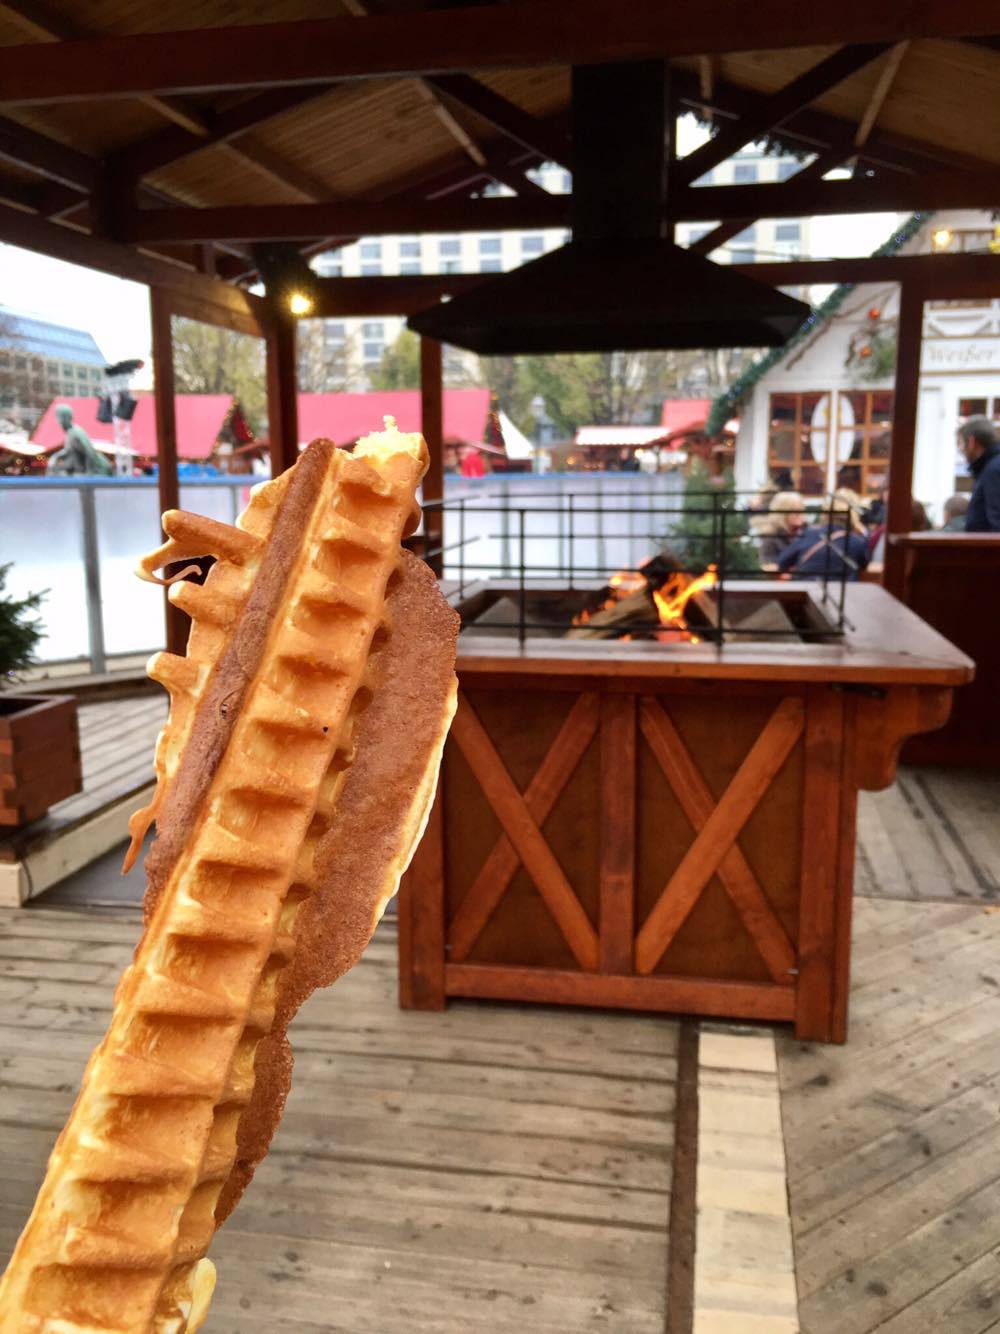 Waffles by a fire? Nothing better.